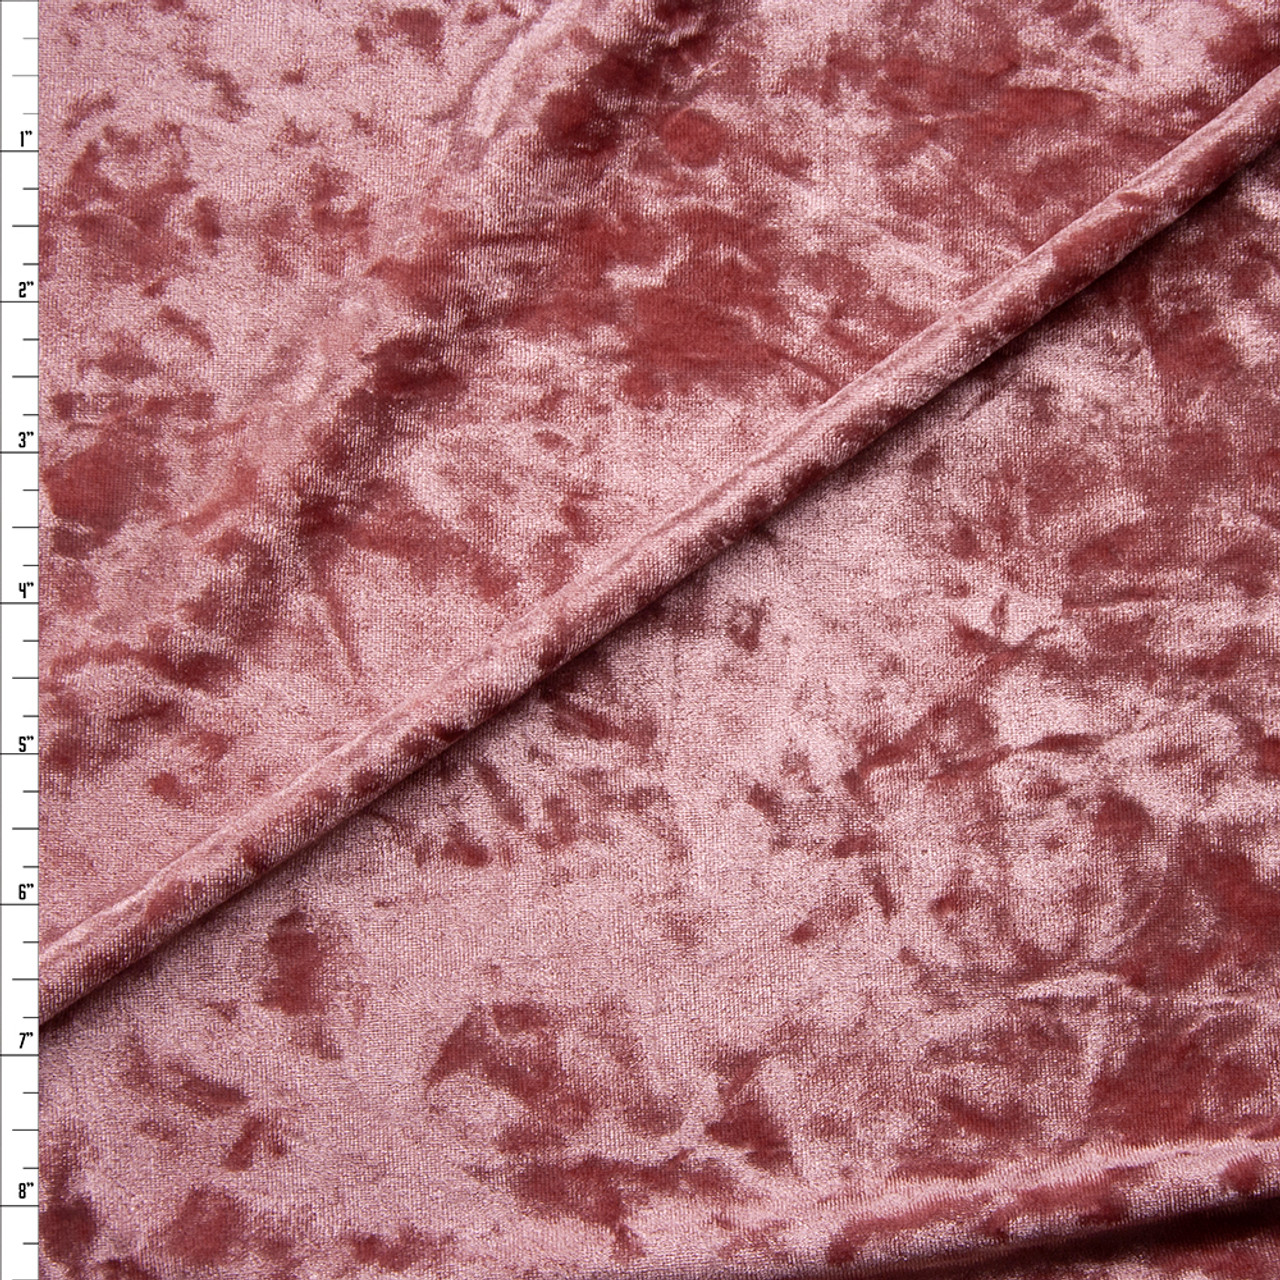 Pink Crushed Velvet Velour Stretch Fabric Material - Polyester - 150cm  (59) wide